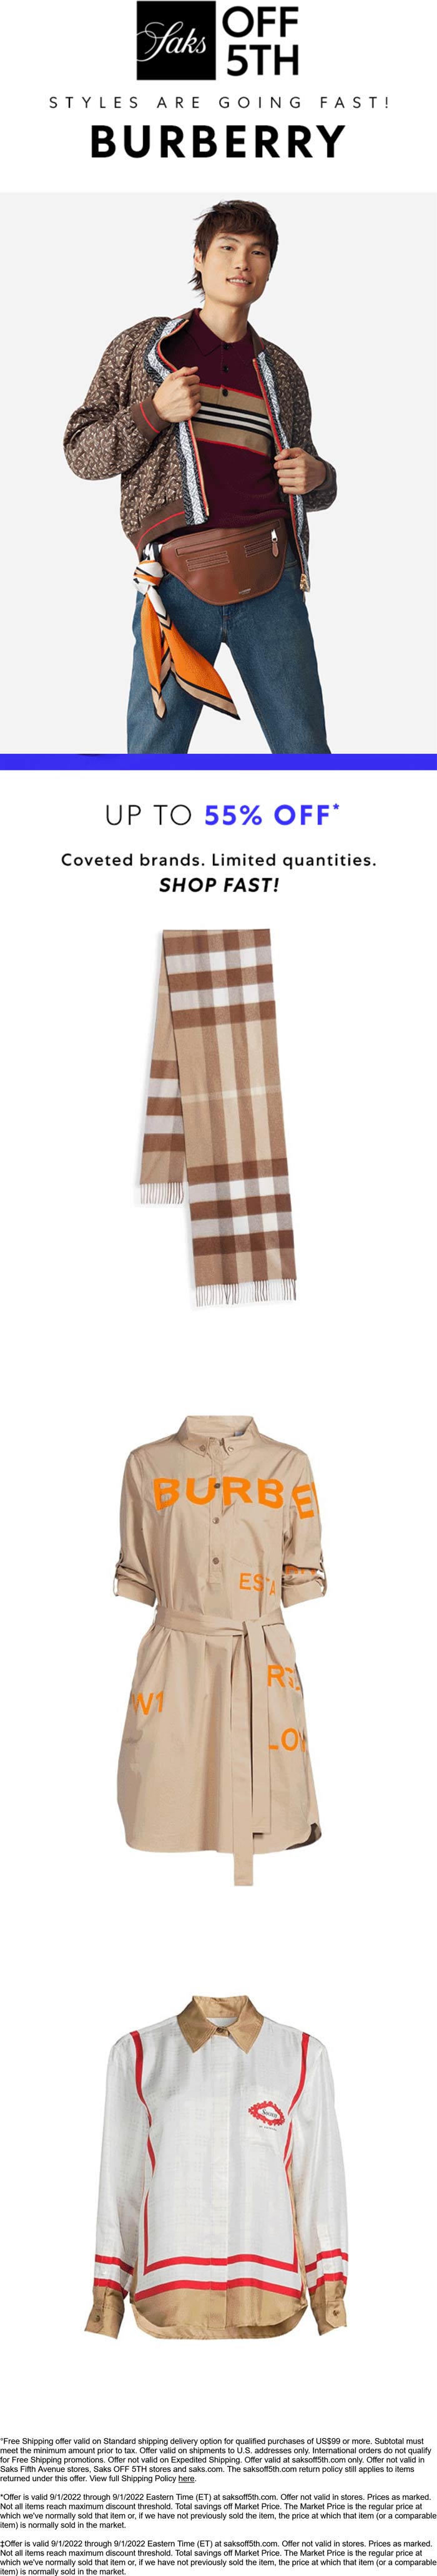 Saks OFF 5TH stores Coupon  Various Burberry 55% off today at Saks OFF 5TH #saksoff5th 